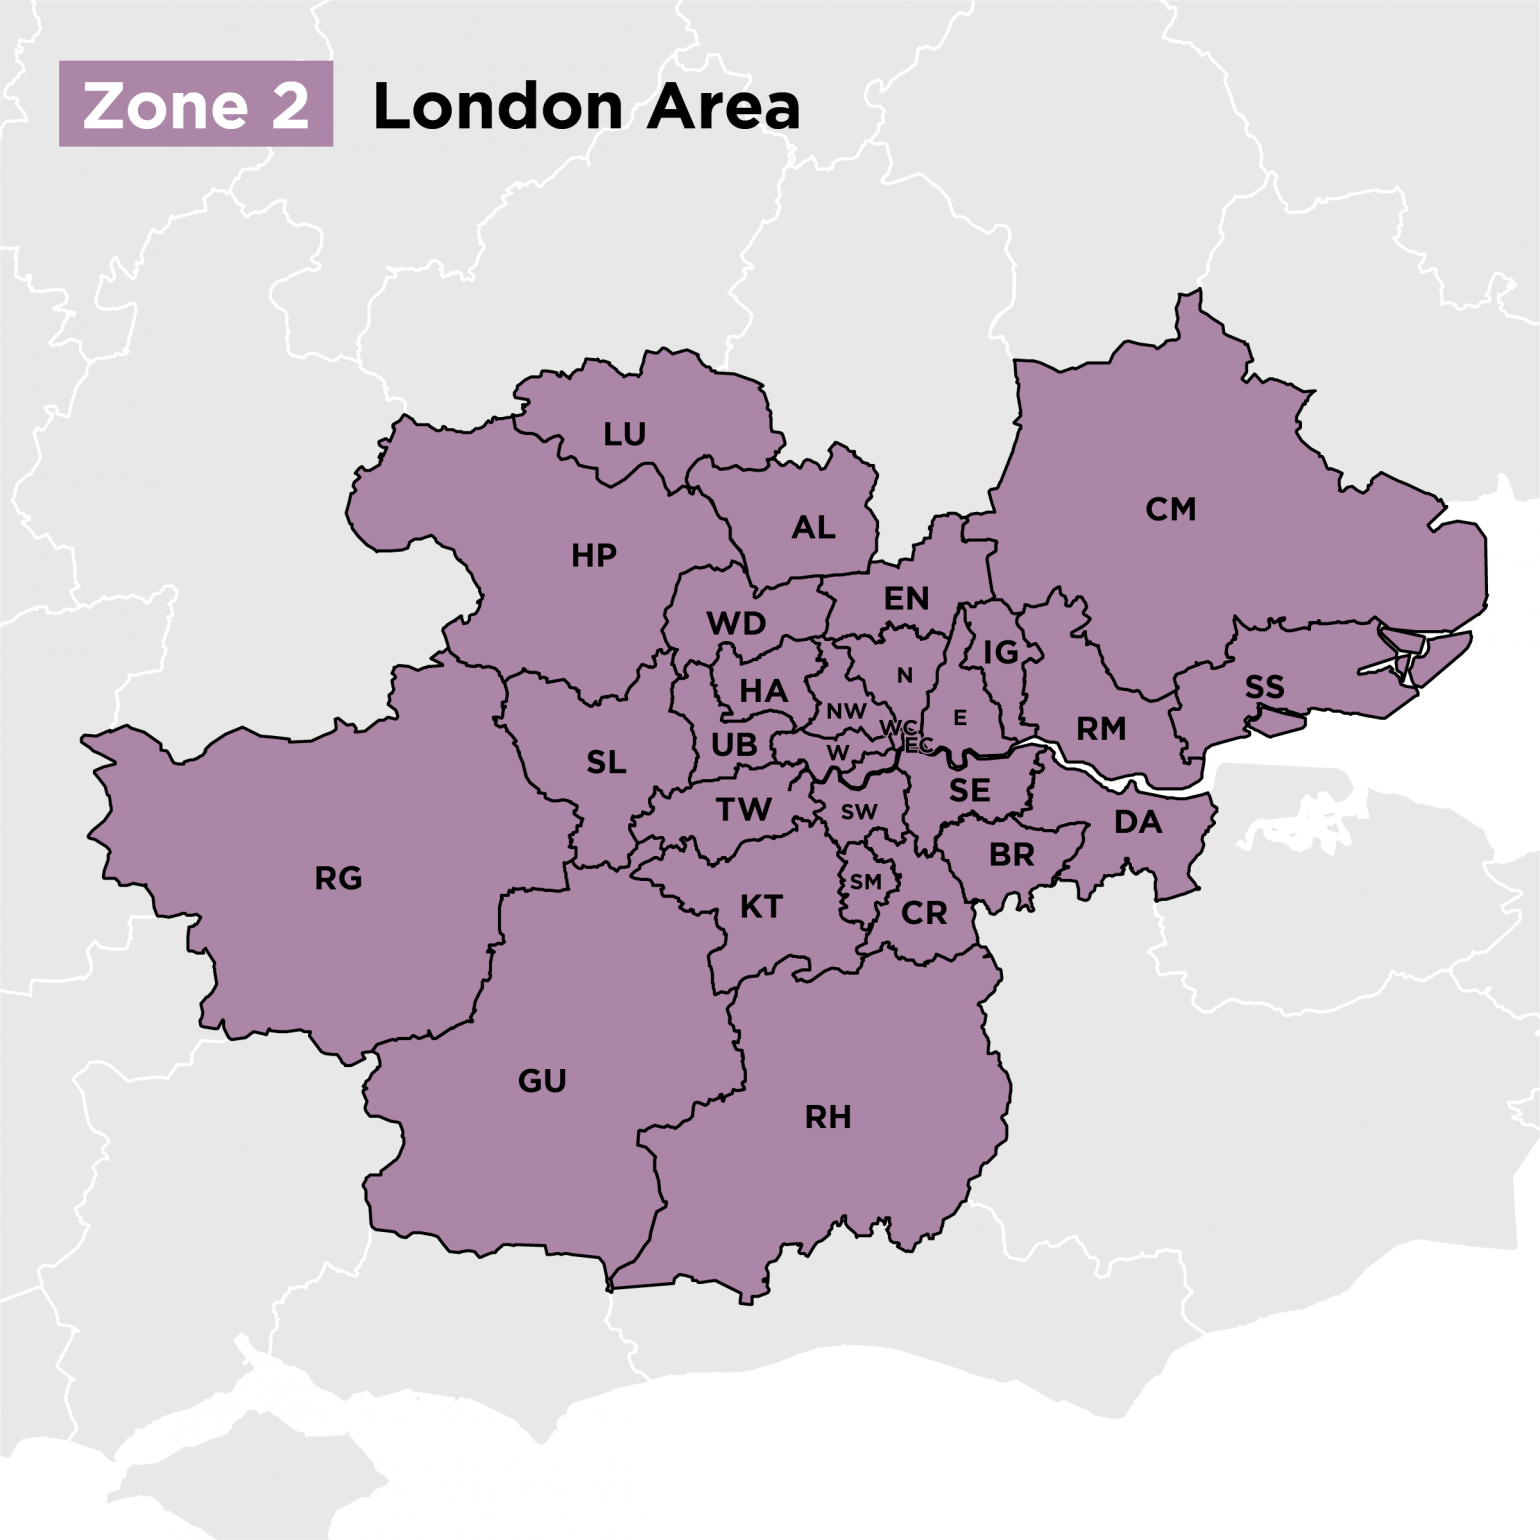 London Sectional Tanks Assembly Zones